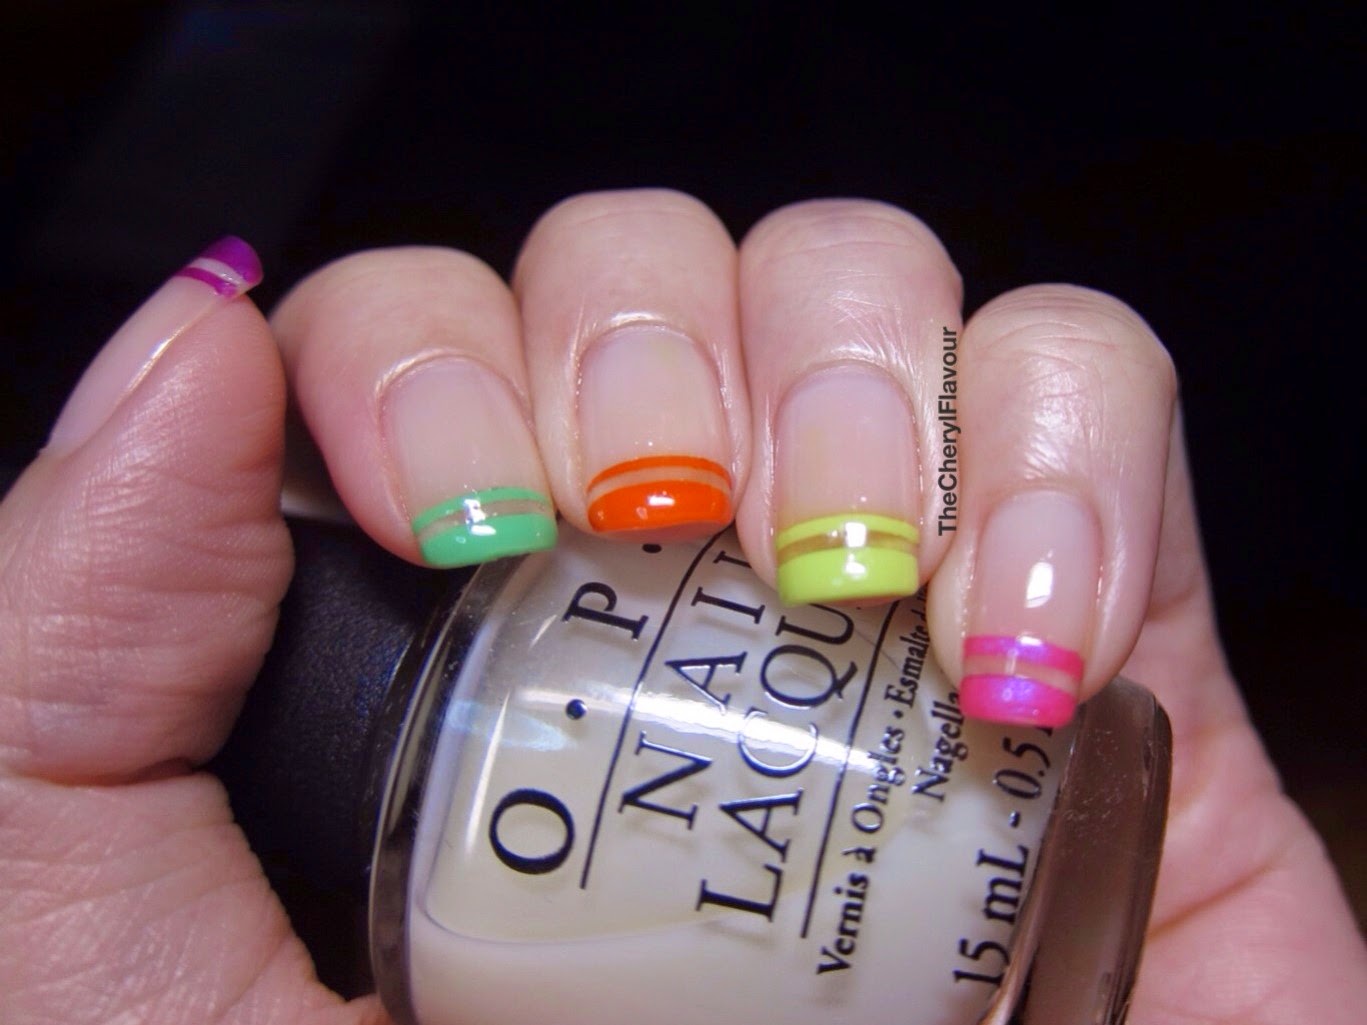 Neon Striped Nail Art: Tips and Tricks for a Professional Look - wide 7